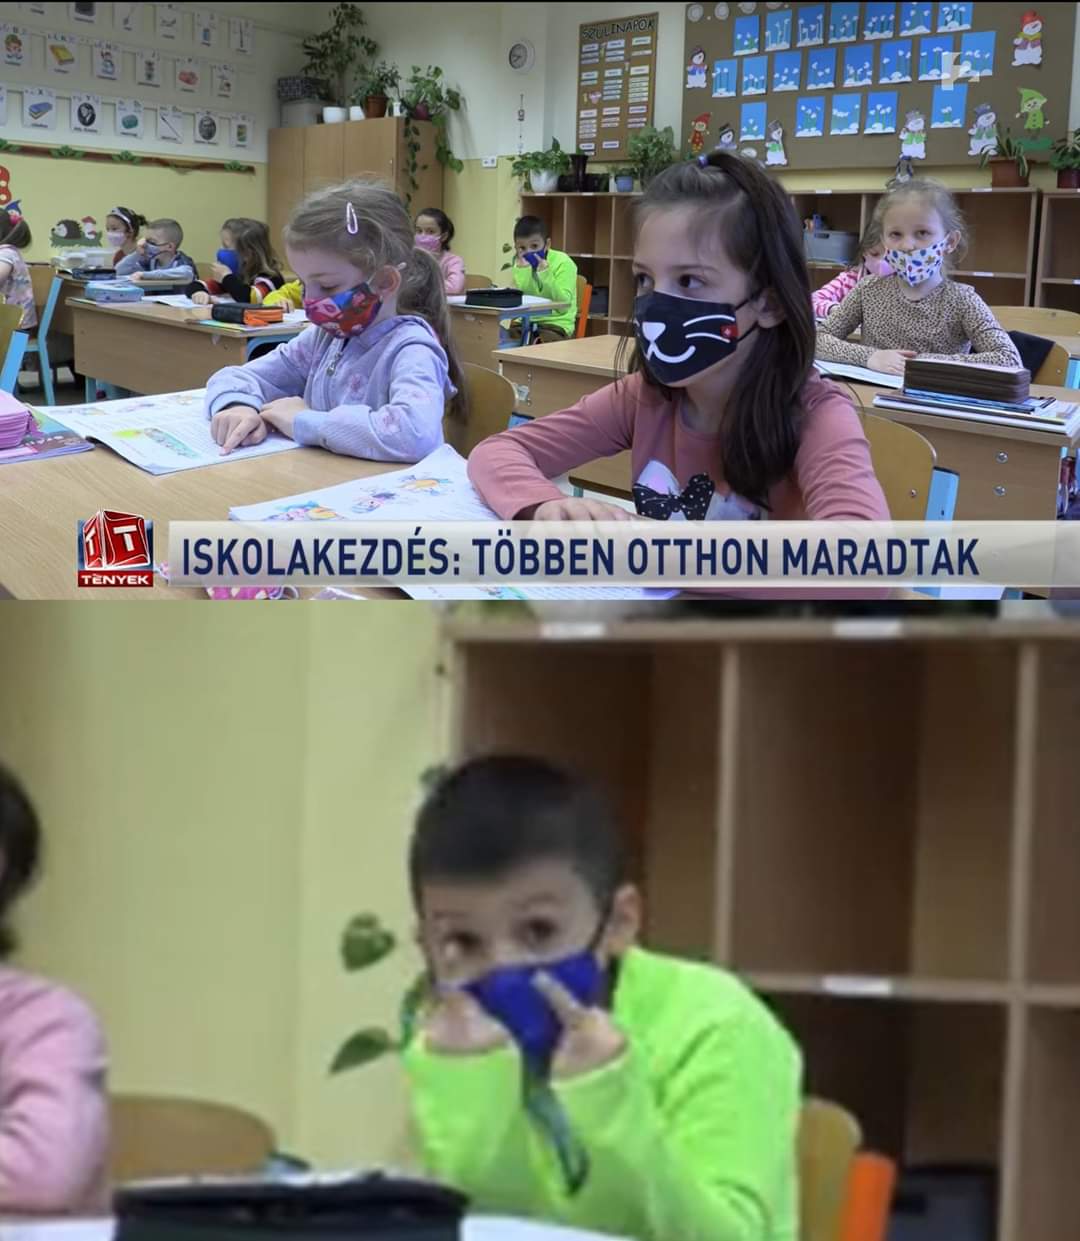 Hungarian news channel reporting school reopening: